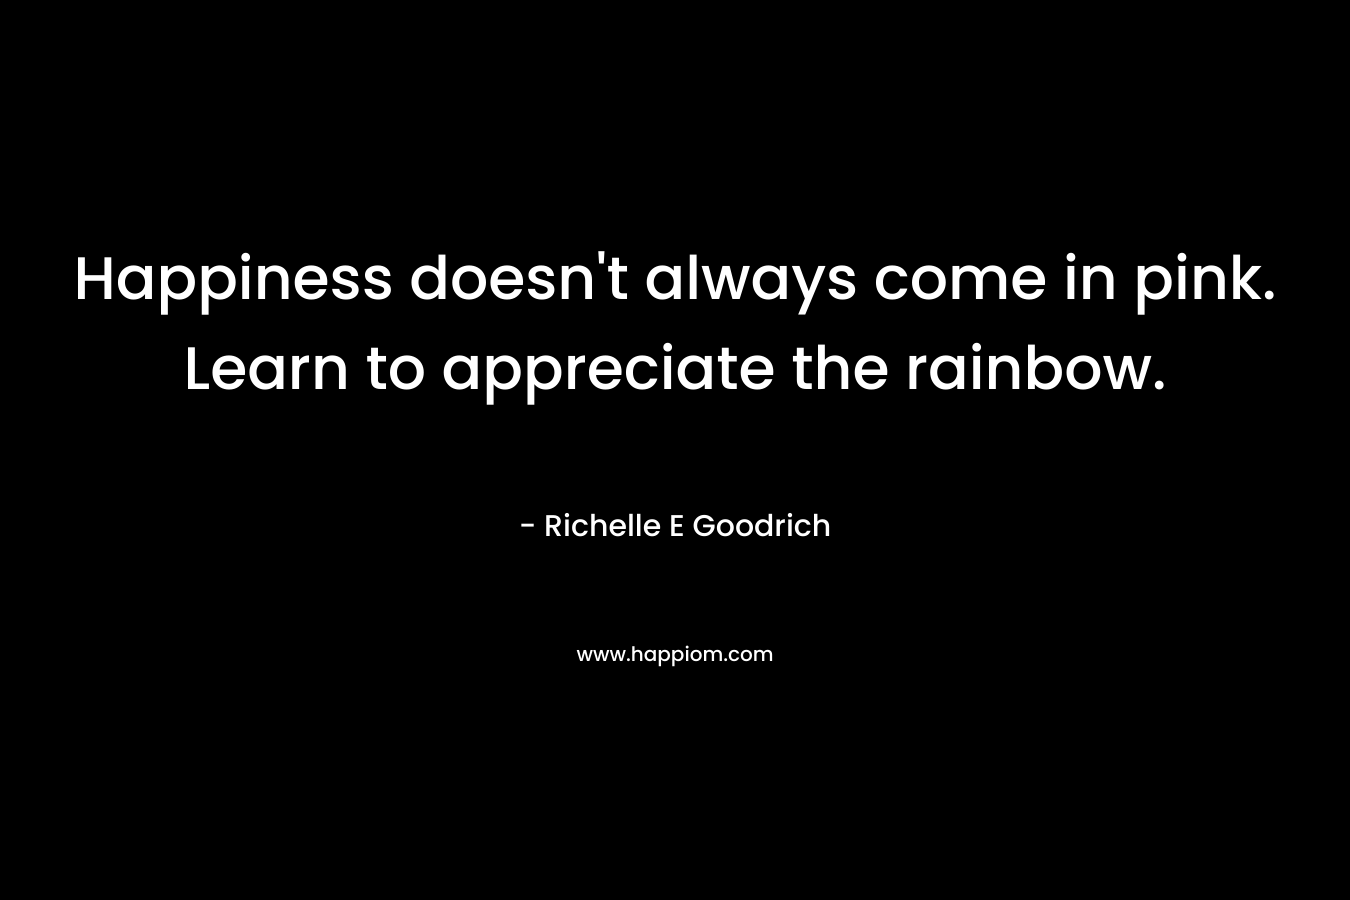 Happiness doesn’t always come in pink. Learn to appreciate the rainbow. – Richelle E Goodrich